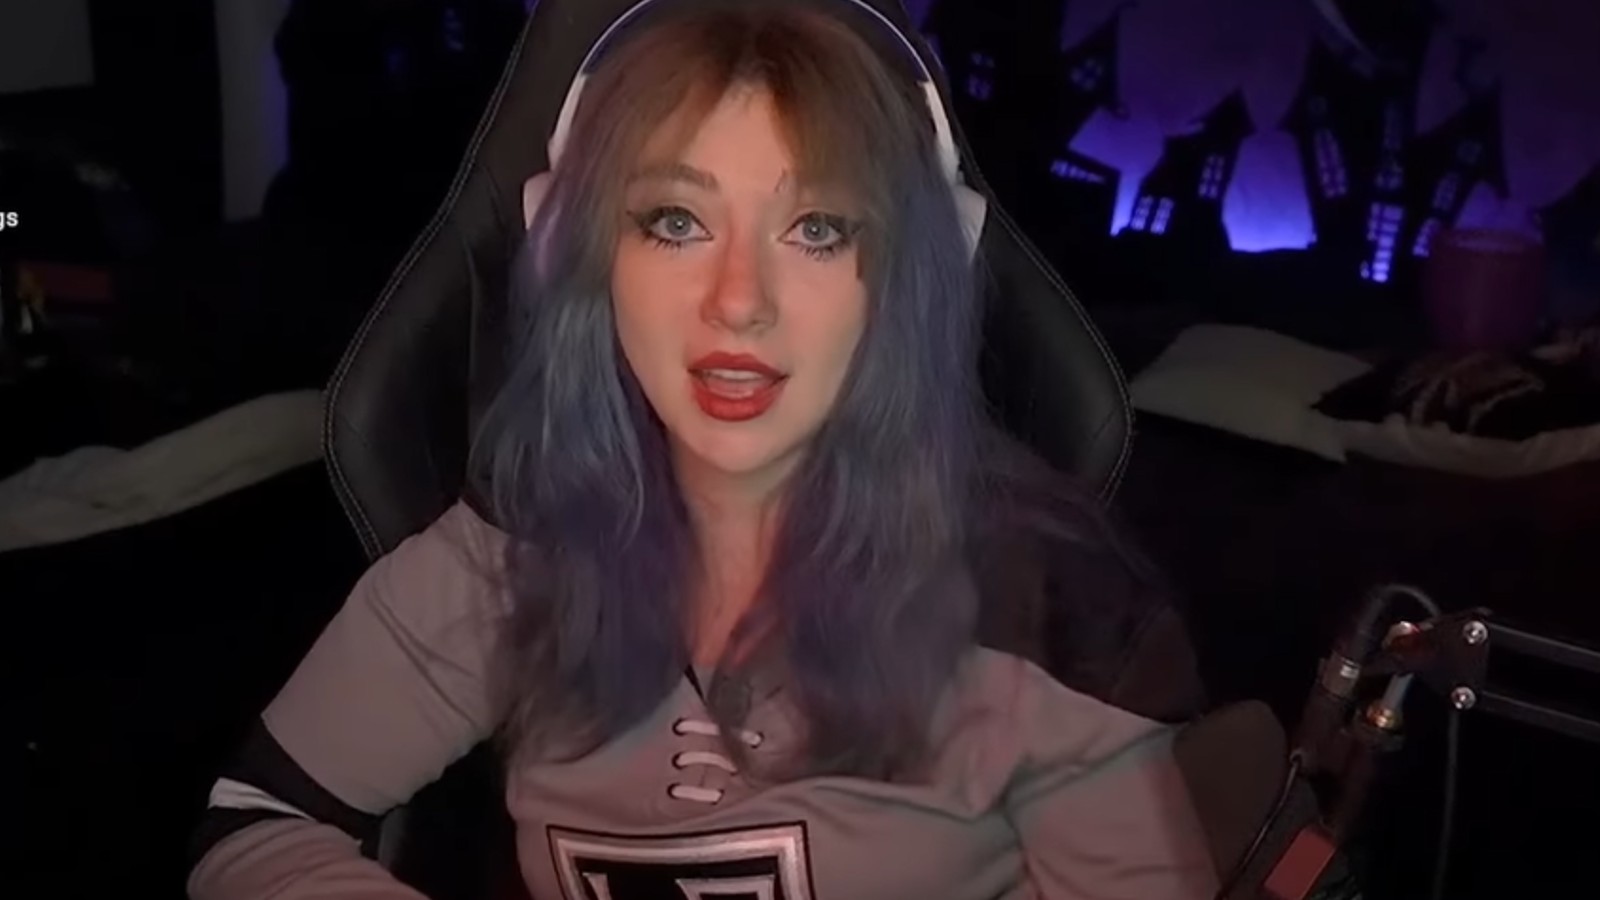 JustAMinx accused of ‘blackmailing’ female streamer after ...